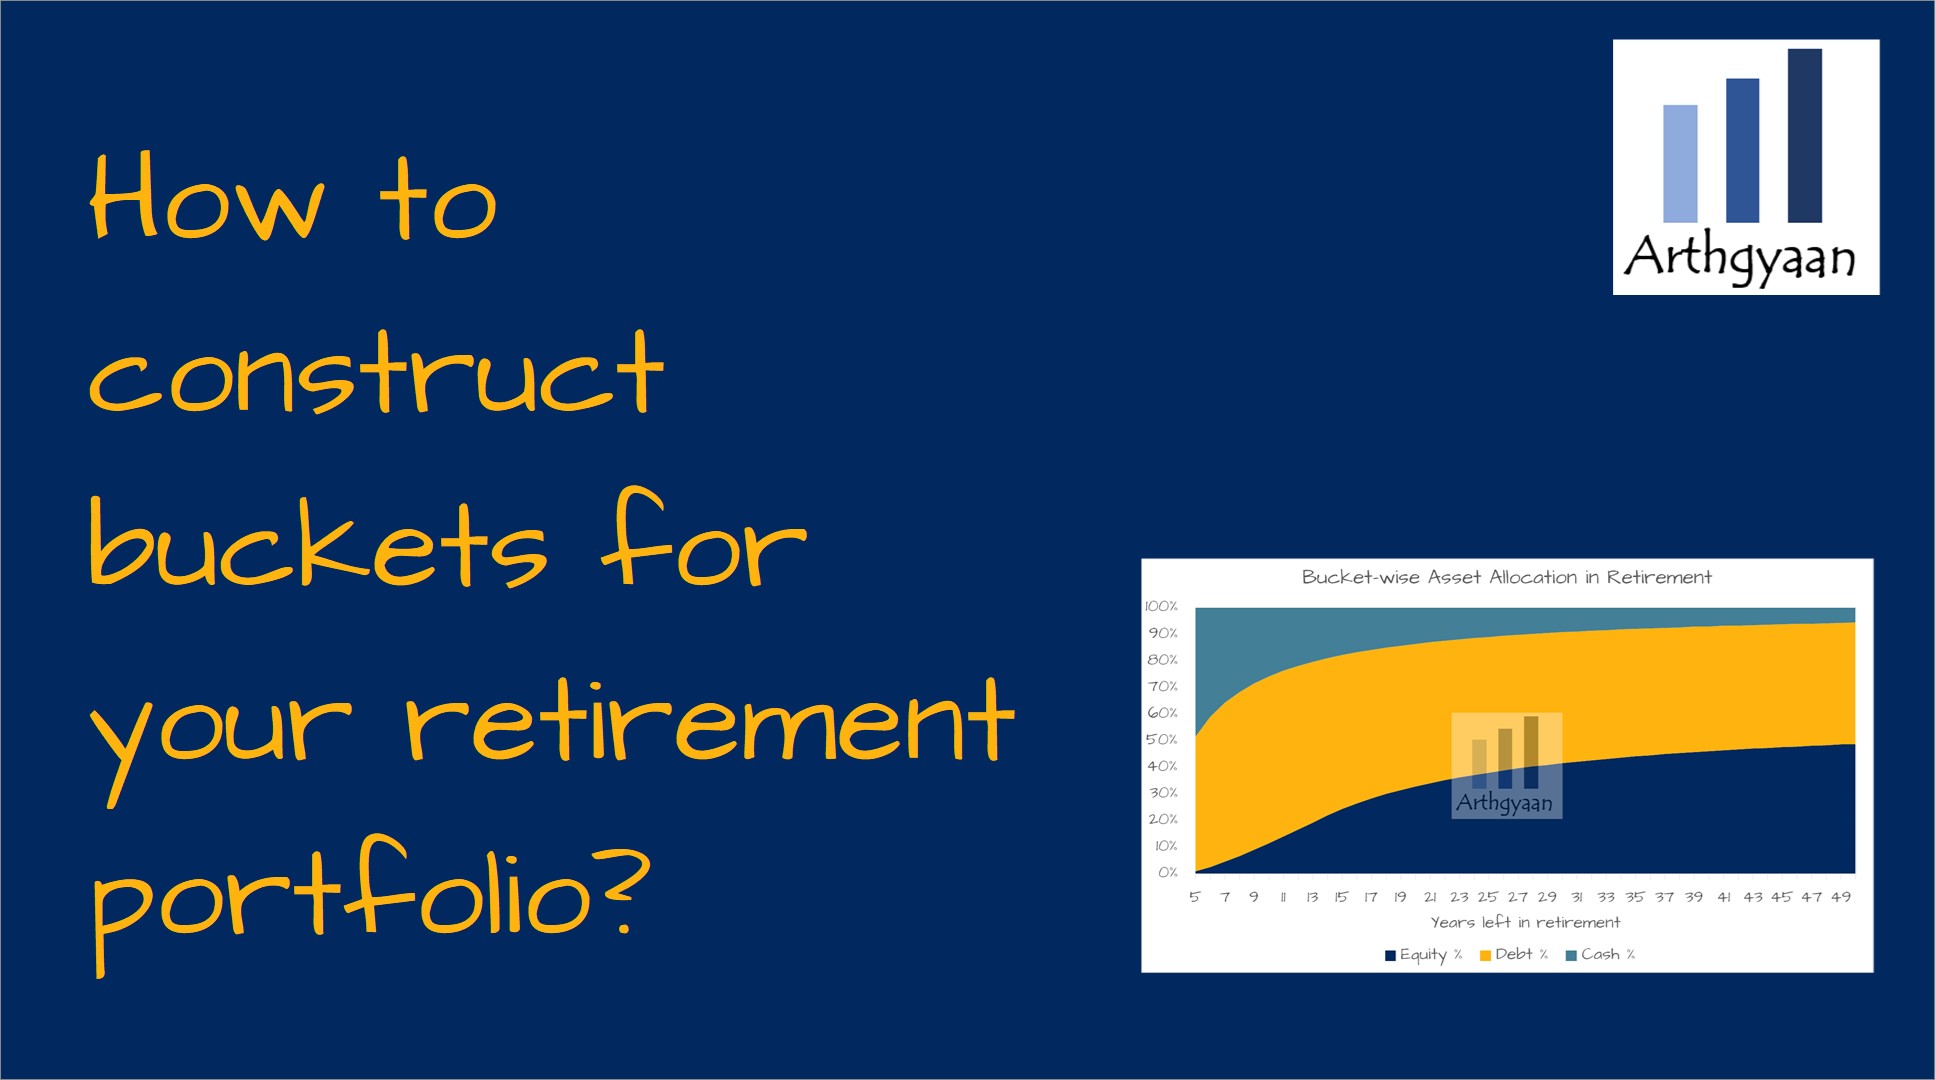 <p>This article explains how retirees should allocate their investments between equity, debt and cash buckets for their post-retirement portfolio.</p>

